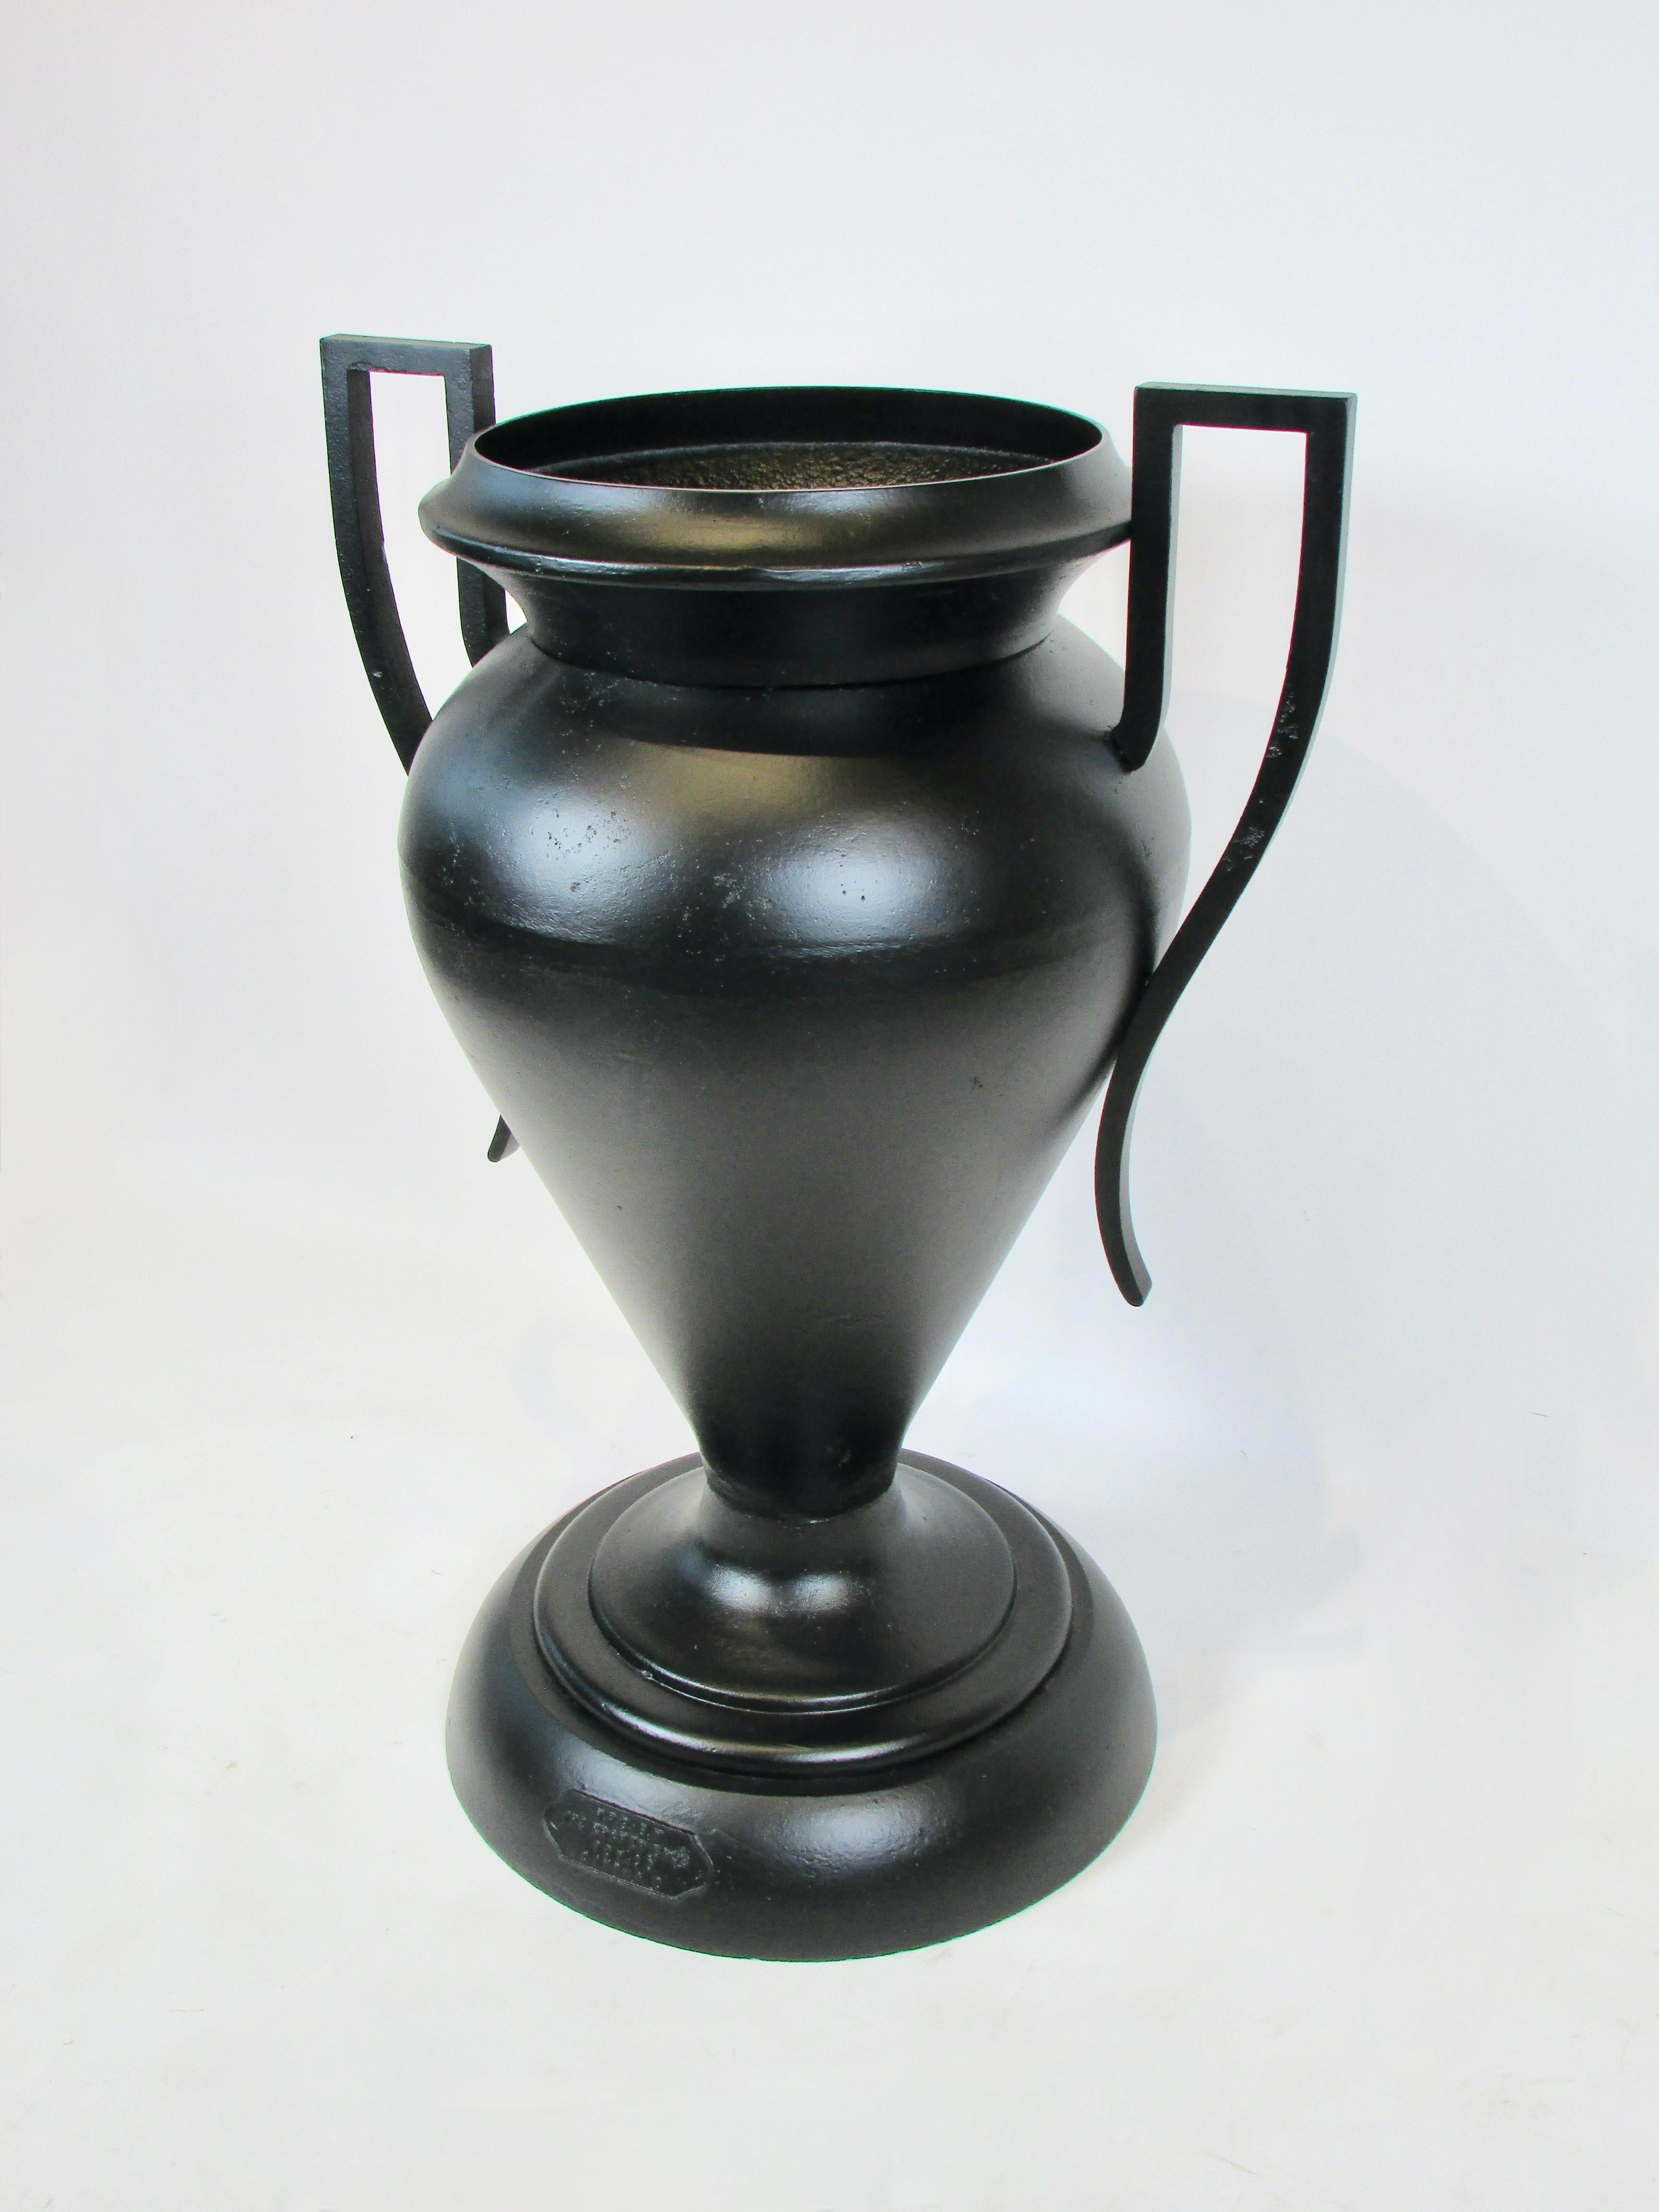 Large Kramer Brothers Cast Iron Planter Pot in Black Finish In Good Condition For Sale In Ferndale, MI